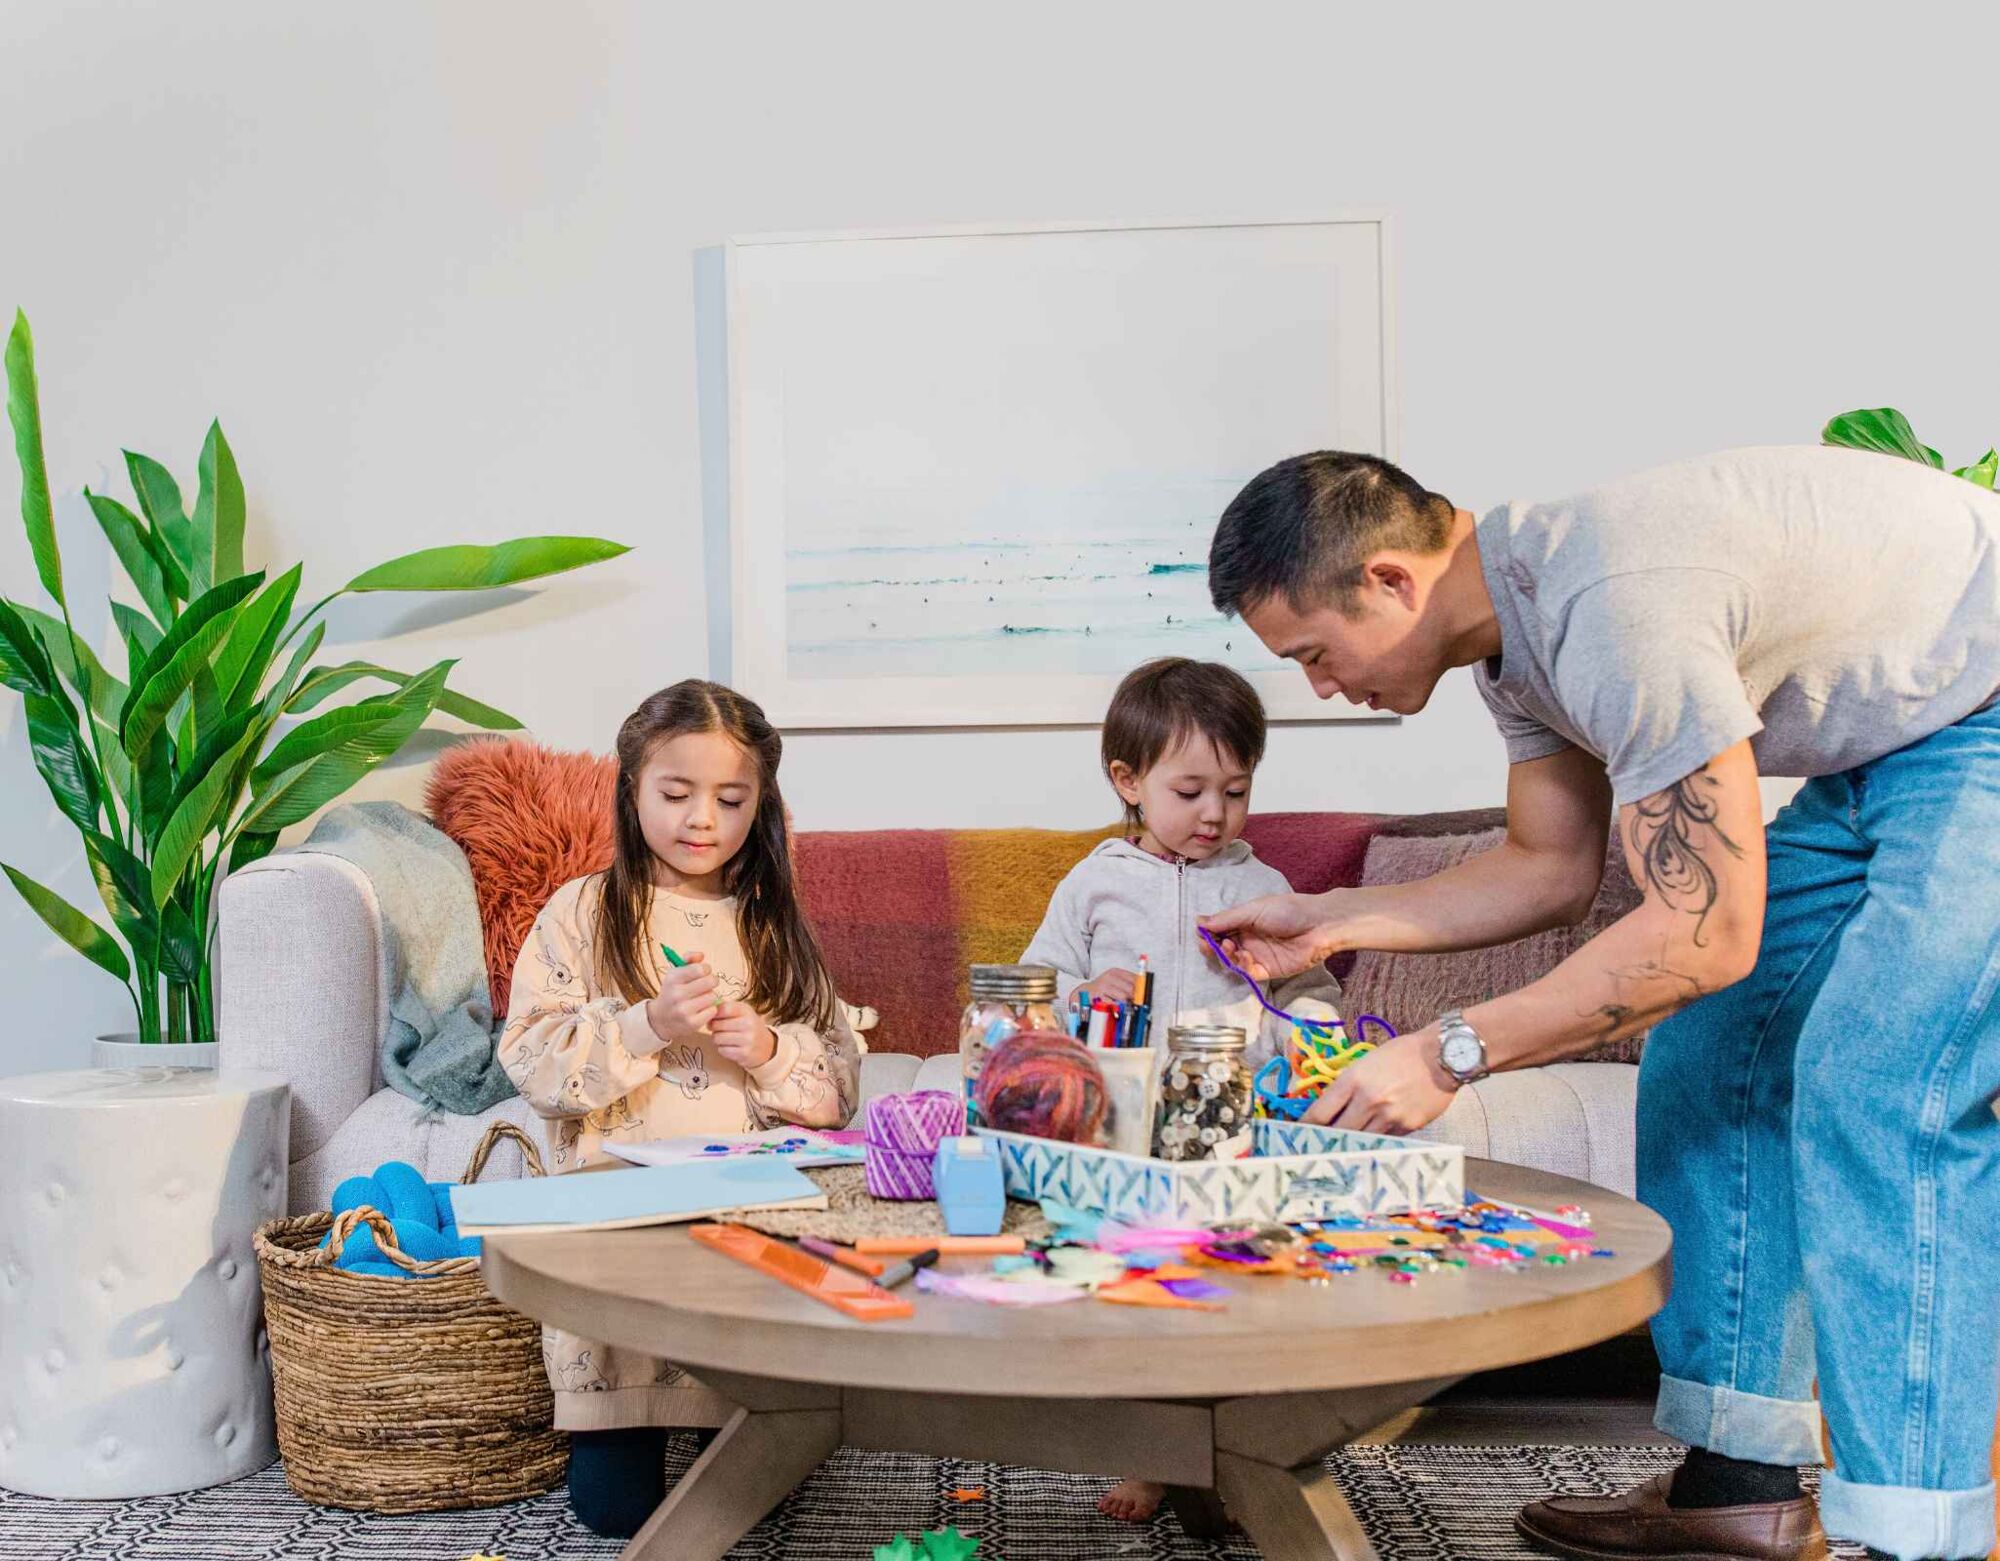 Man with two young children playing inside at coffee table